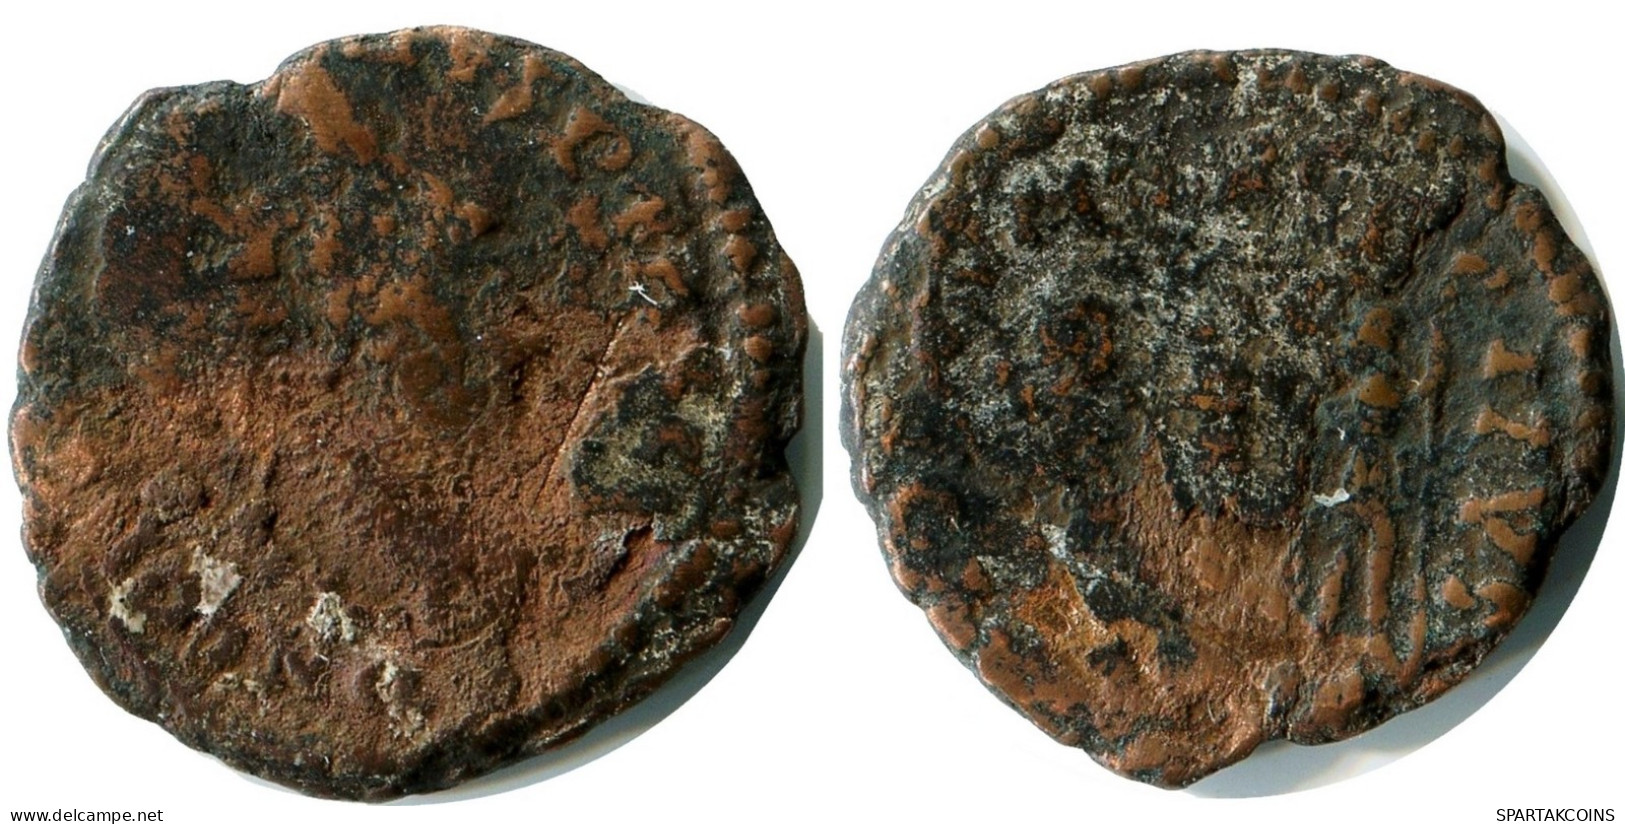 CONSTANS MINTED IN CONSTANTINOPLE FOUND IN IHNASYAH HOARD EGYPT #ANC11938.14.D.A - The Christian Empire (307 AD To 363 AD)